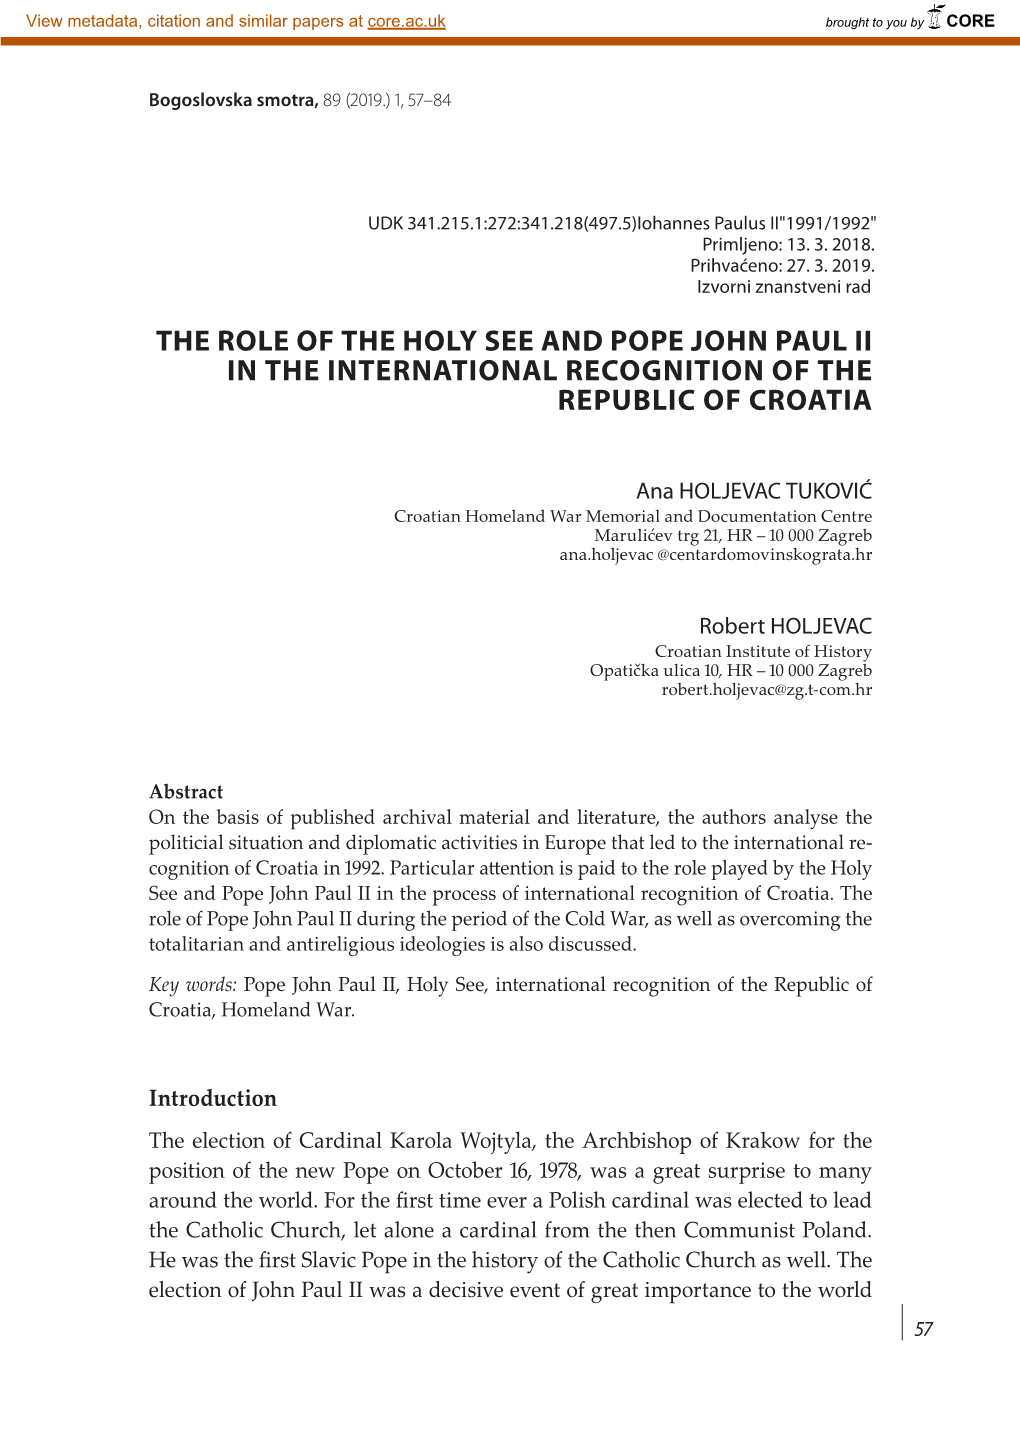 The Role of the Holy See and Pope John Paul II in the International Recognition of the Republic of Croatia